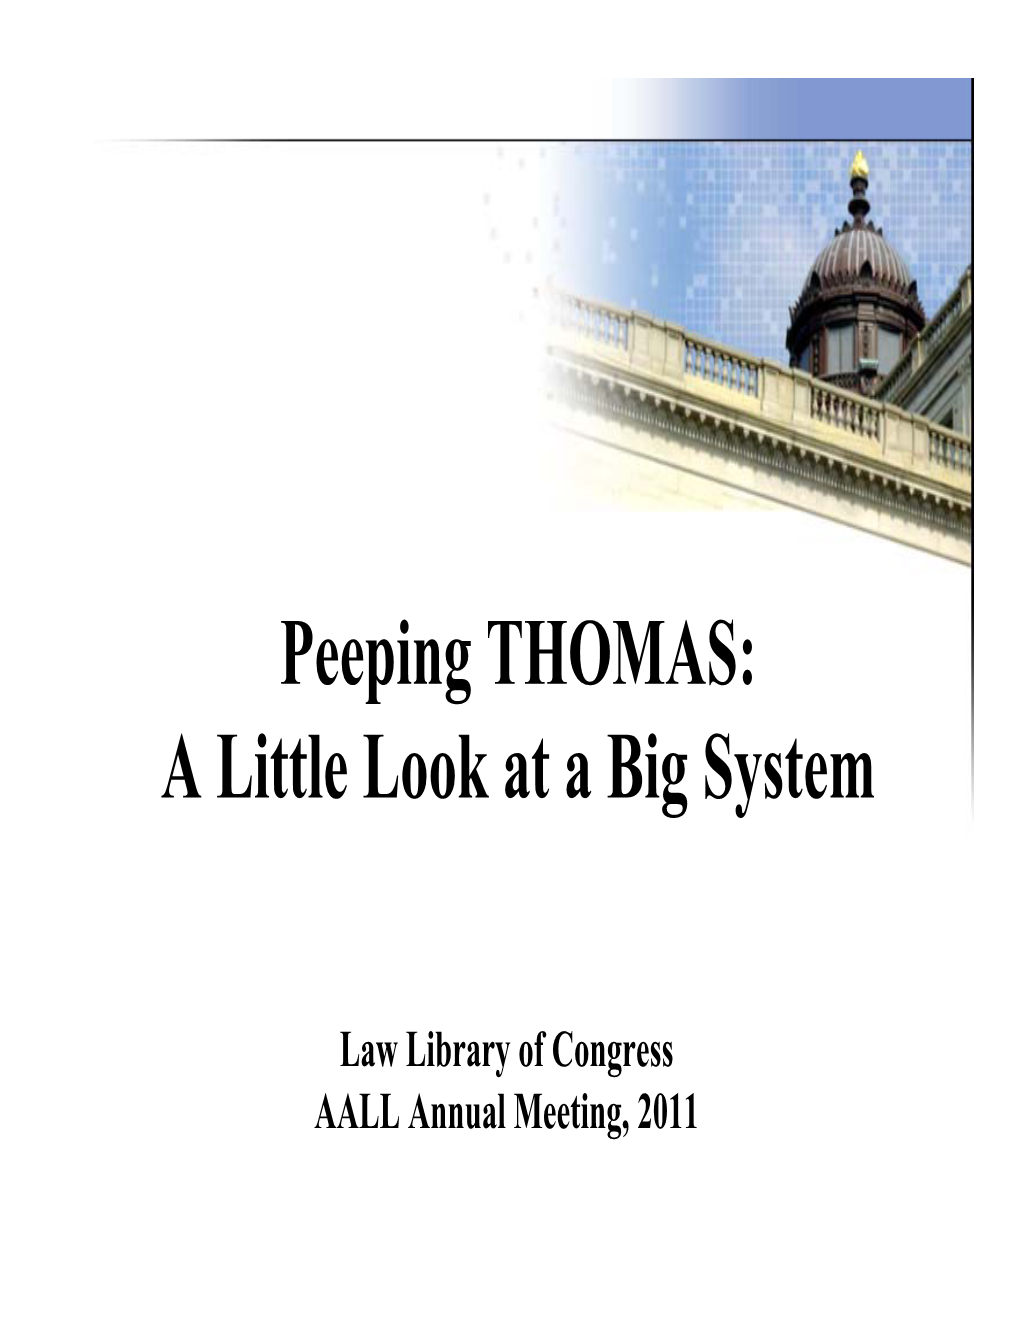 Peeping THOMAS: a Little Look at a Big System